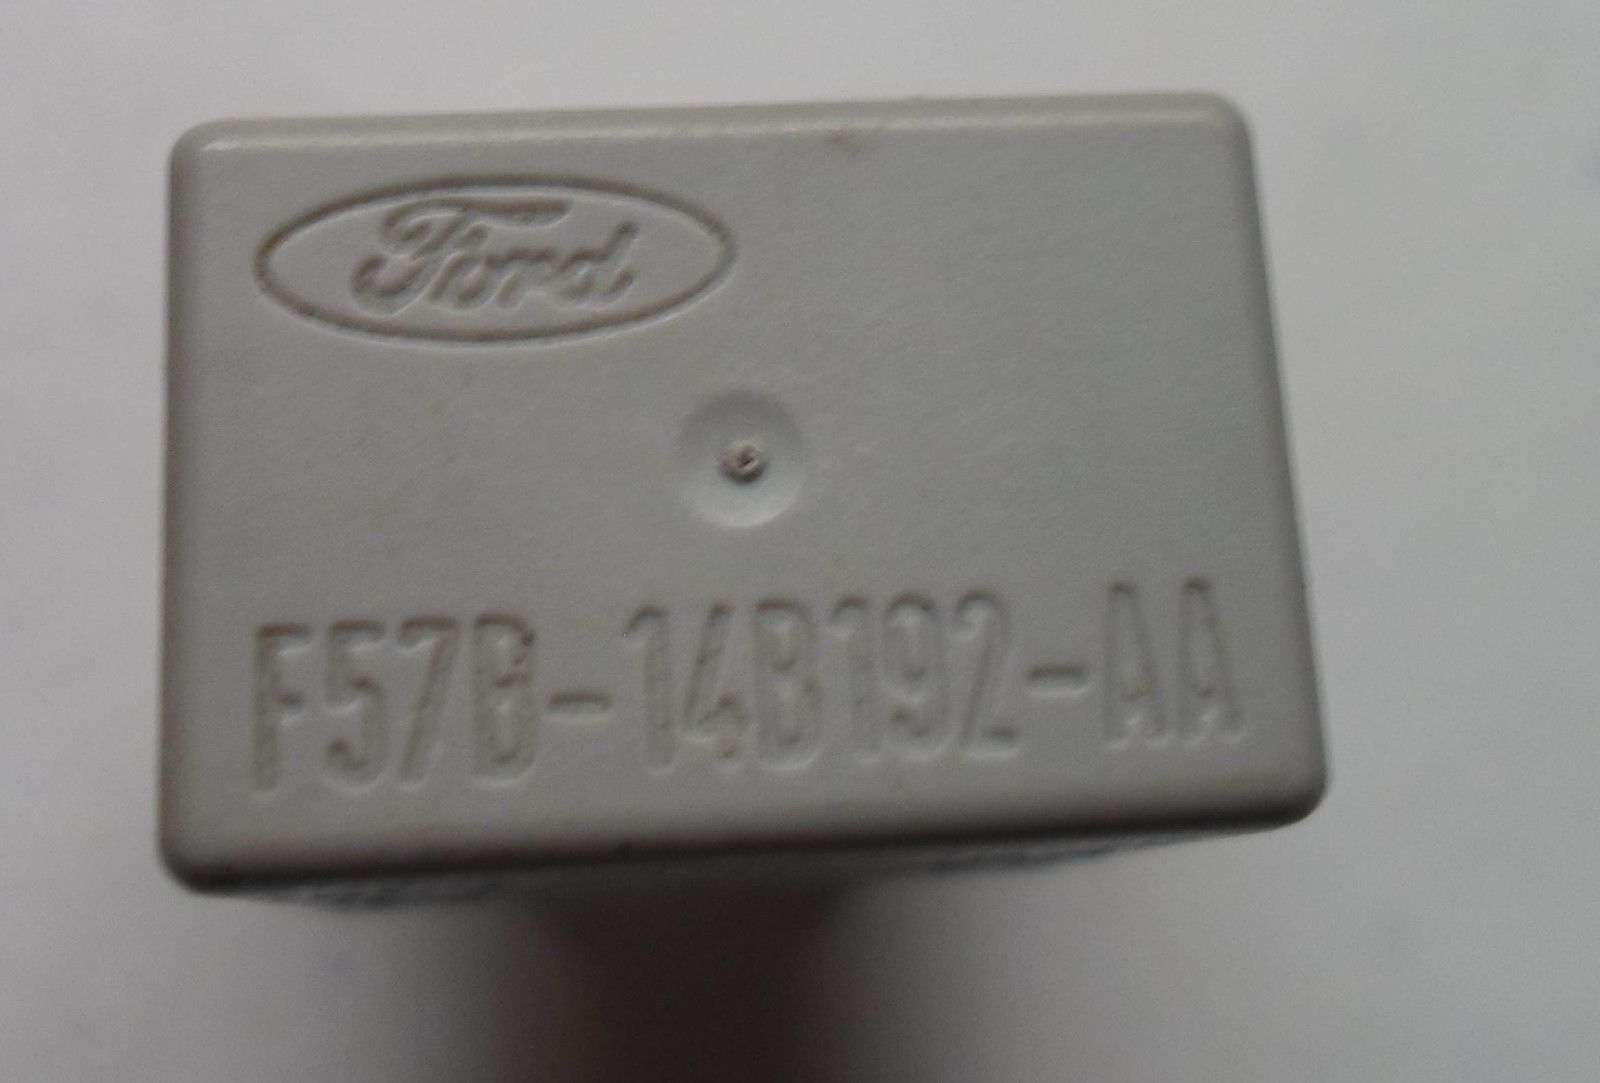 FORD RELAY F57B-14B192-AA BOSCH TESTED OEM FREE SHIPPING 6 MONTH WARRANTY! F3